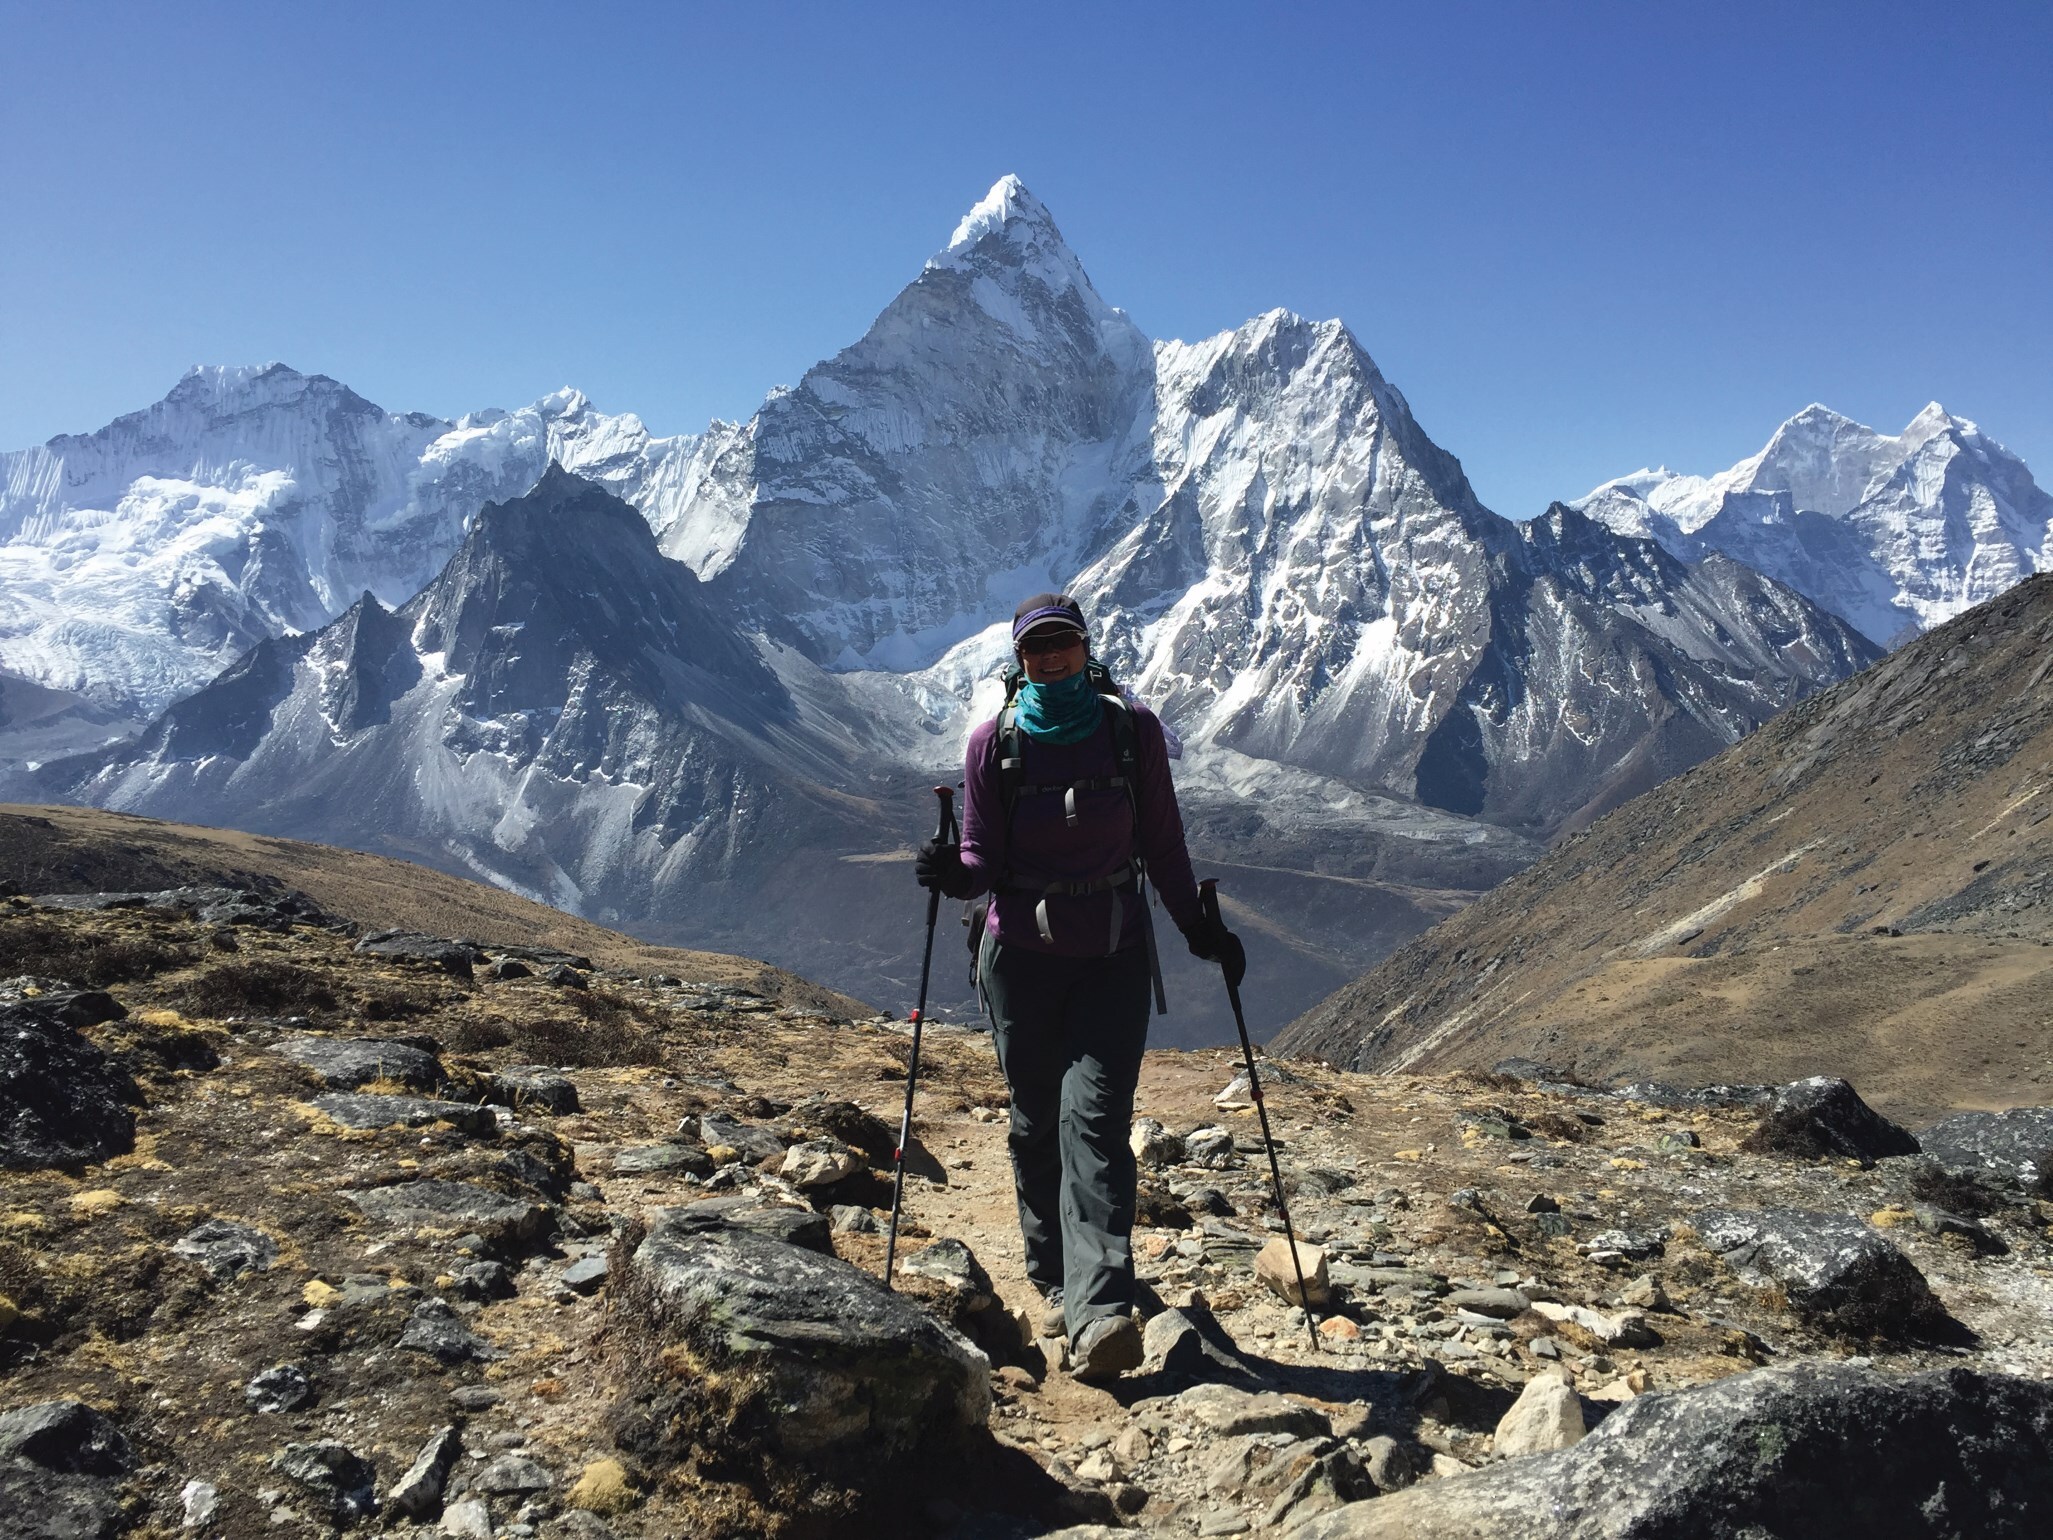 Adventure Consultants provide high quality climbing and trekking trips to the Himalaya and around the world